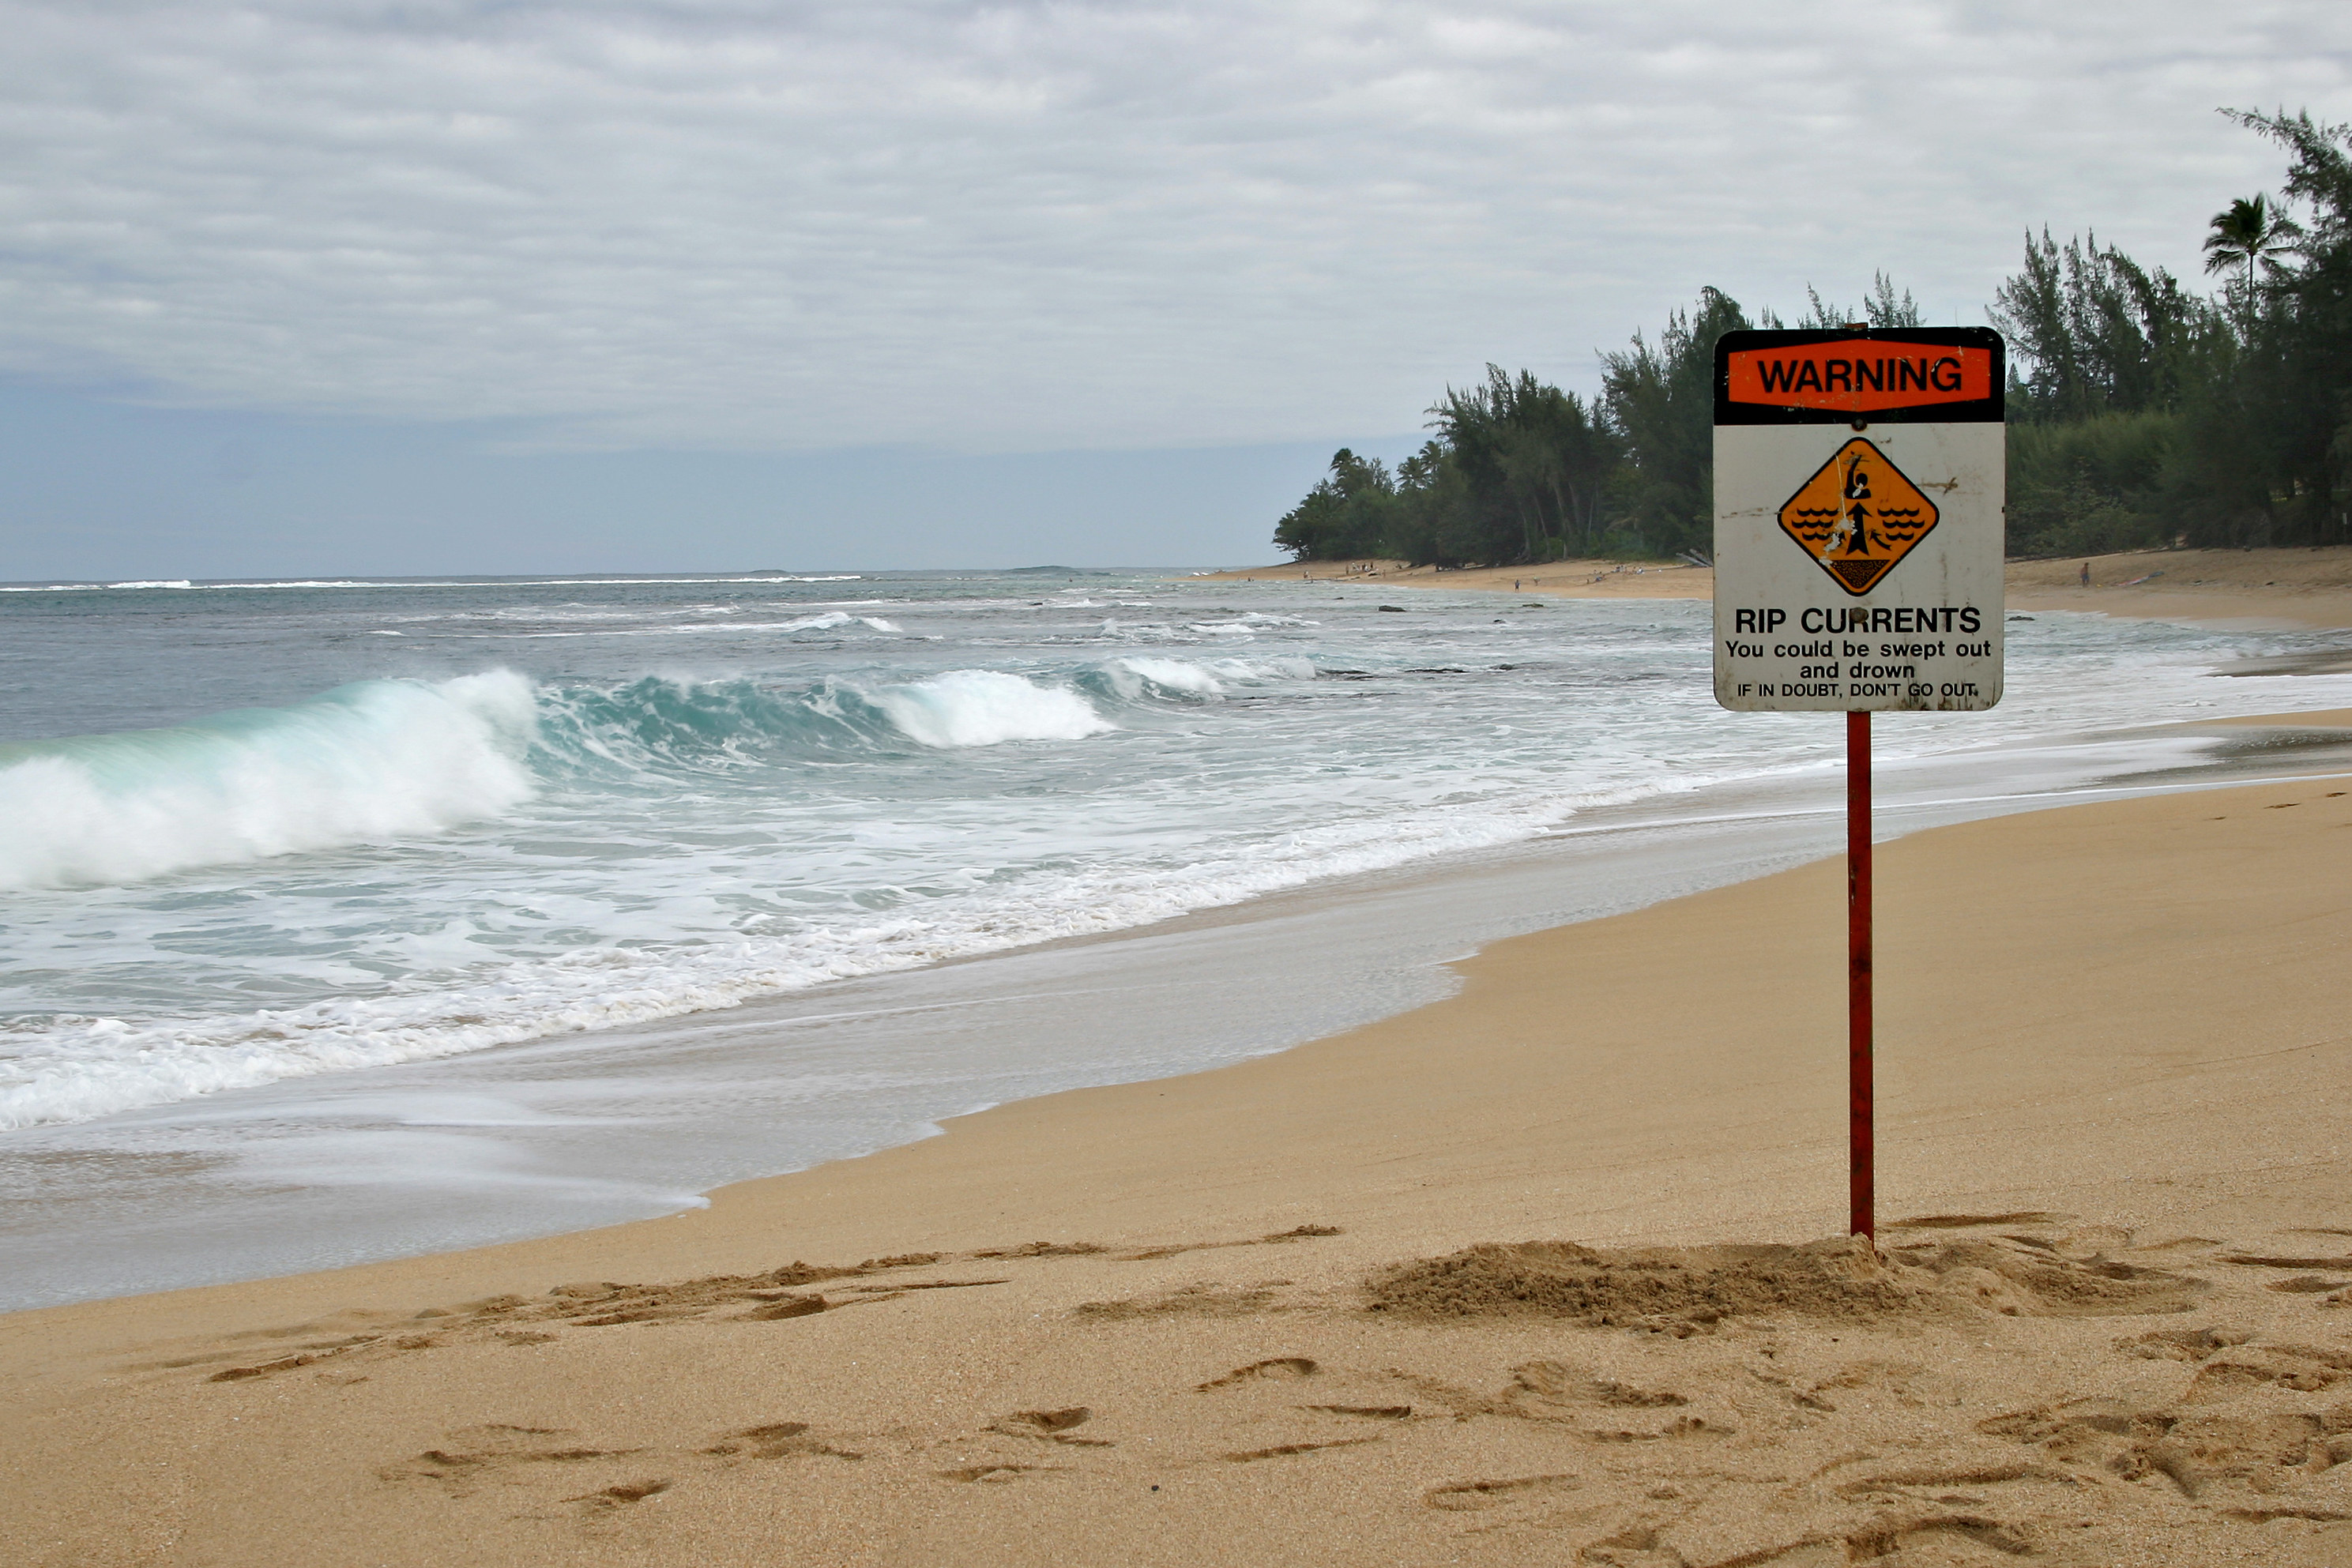 A beach scene with a &quot;Warning: Rip currents&quot; sign in the sand